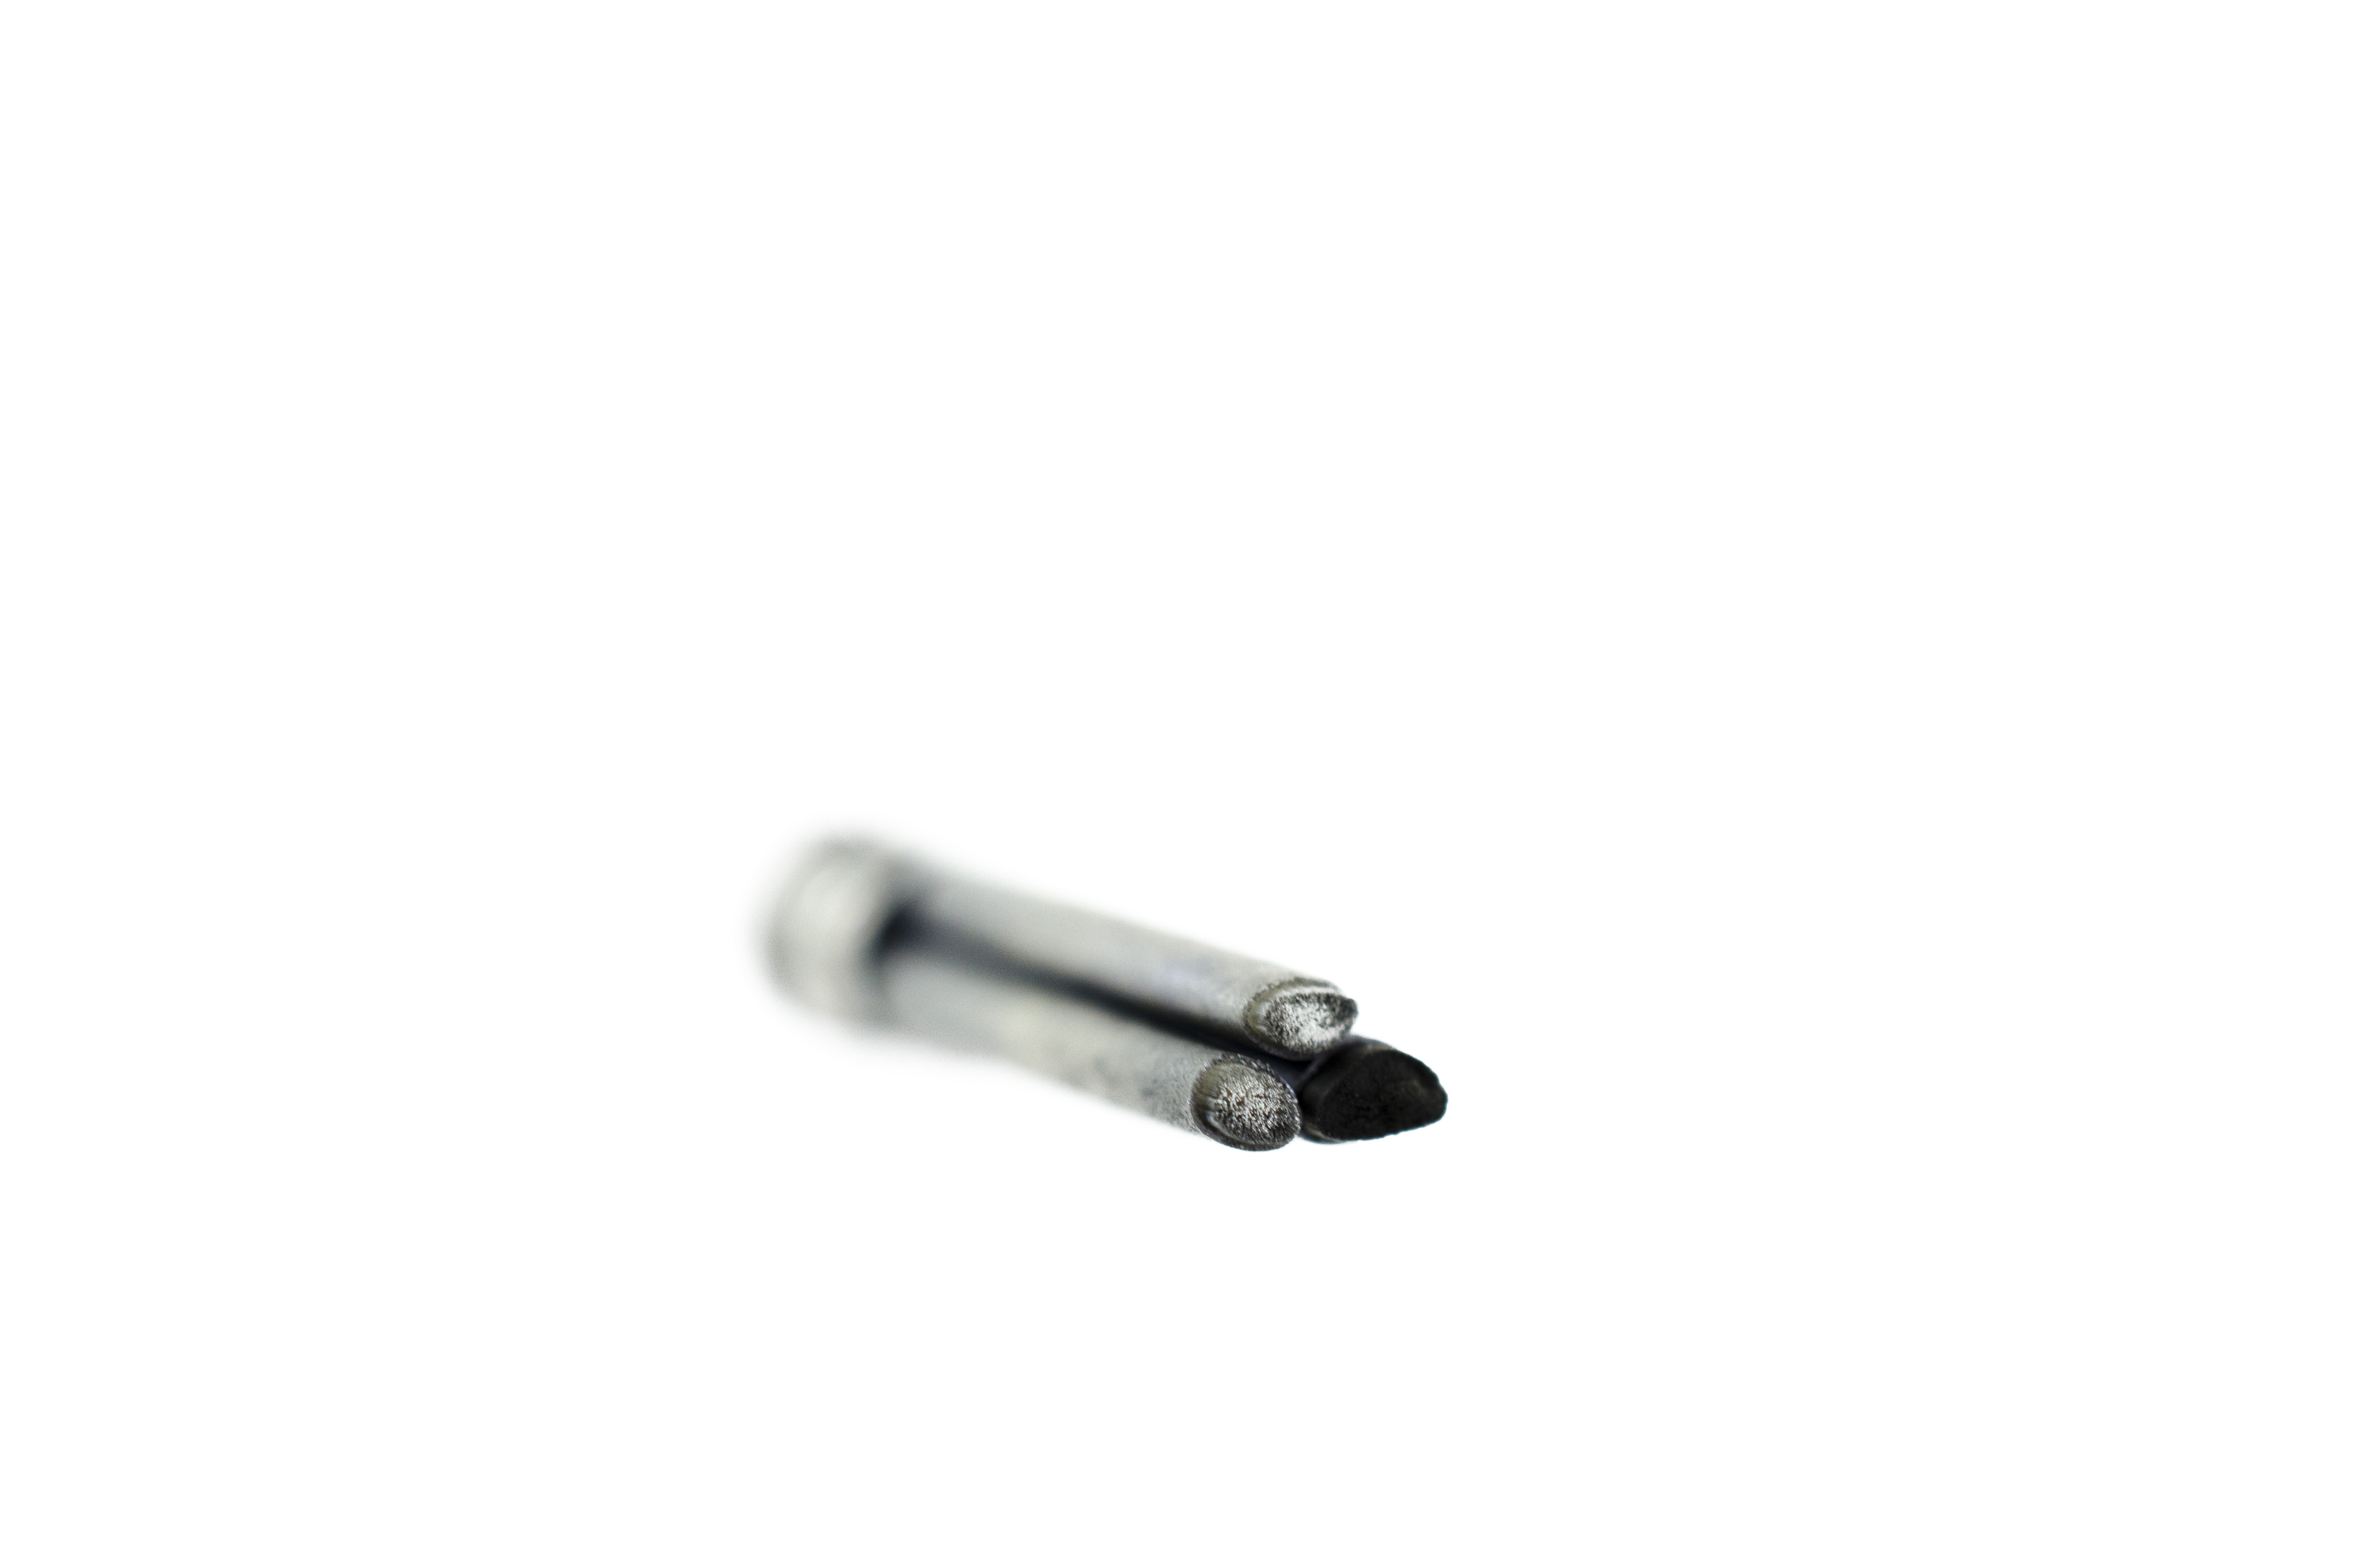 OEM Distal Tip with Lenses, C-Cover, and Objective Stack - ENF-L3